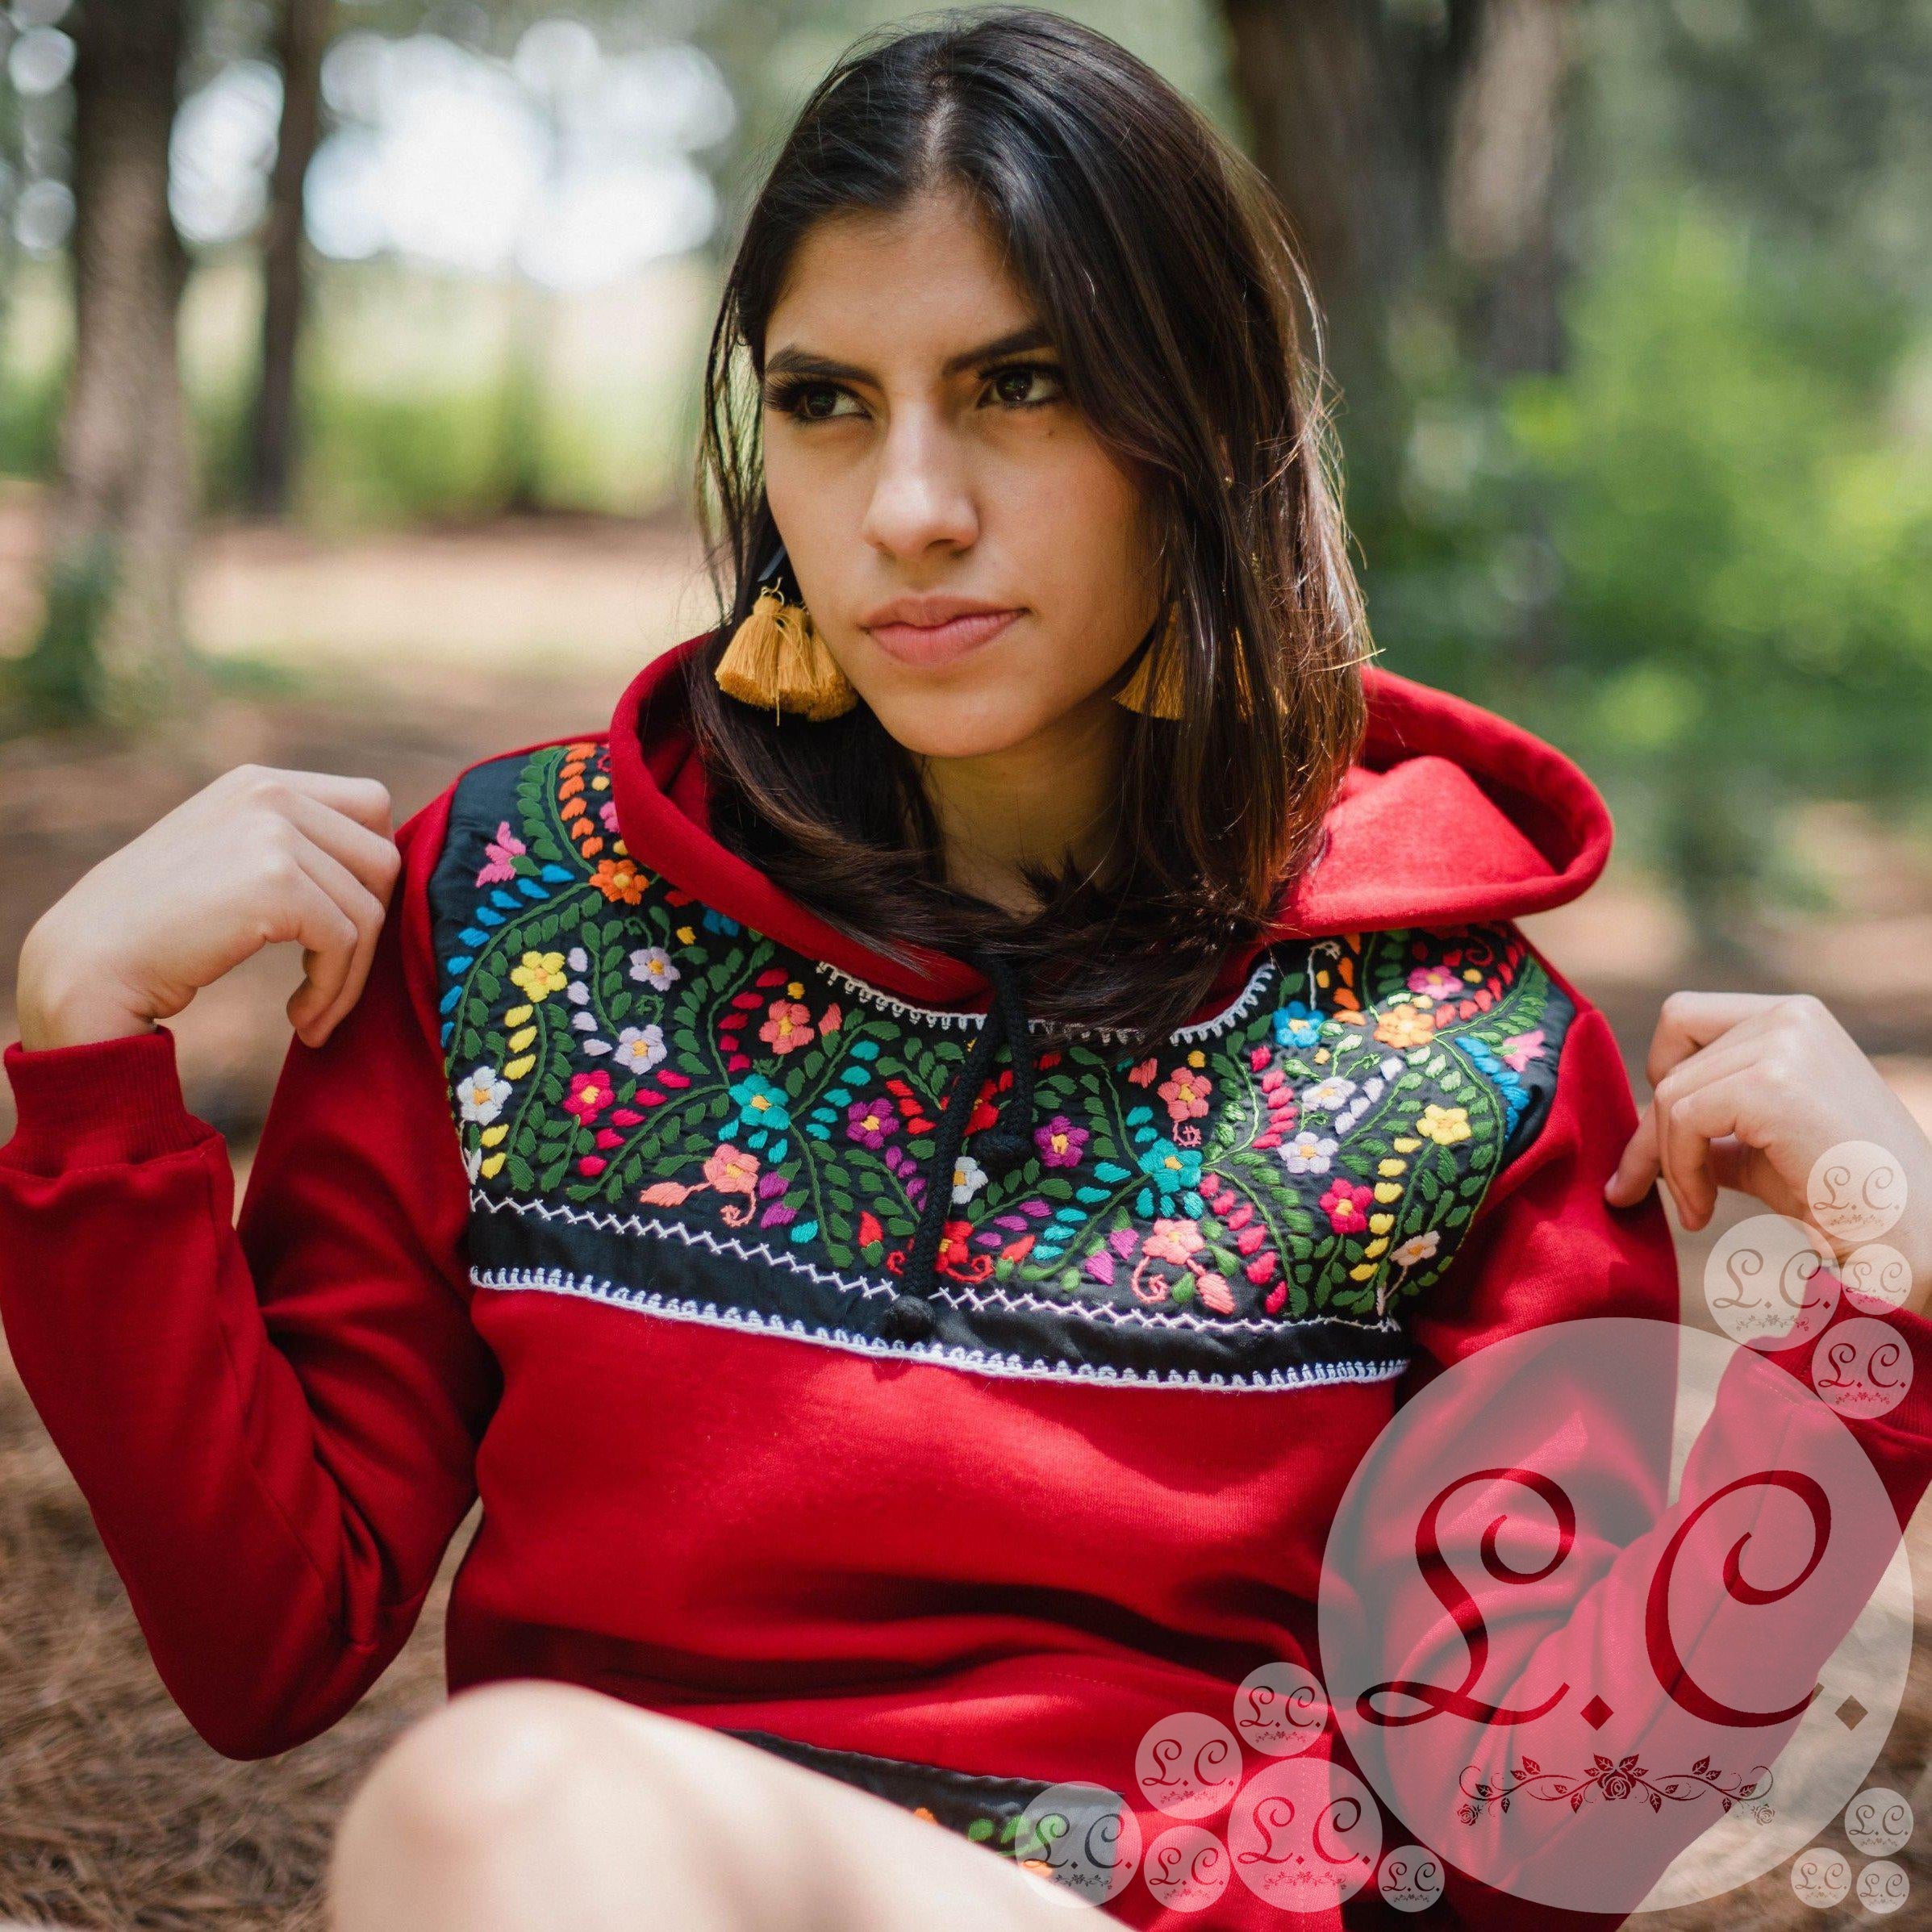 Unique Mexican Style Embroidered Sweatshirt # 7 Red – Le Catrina